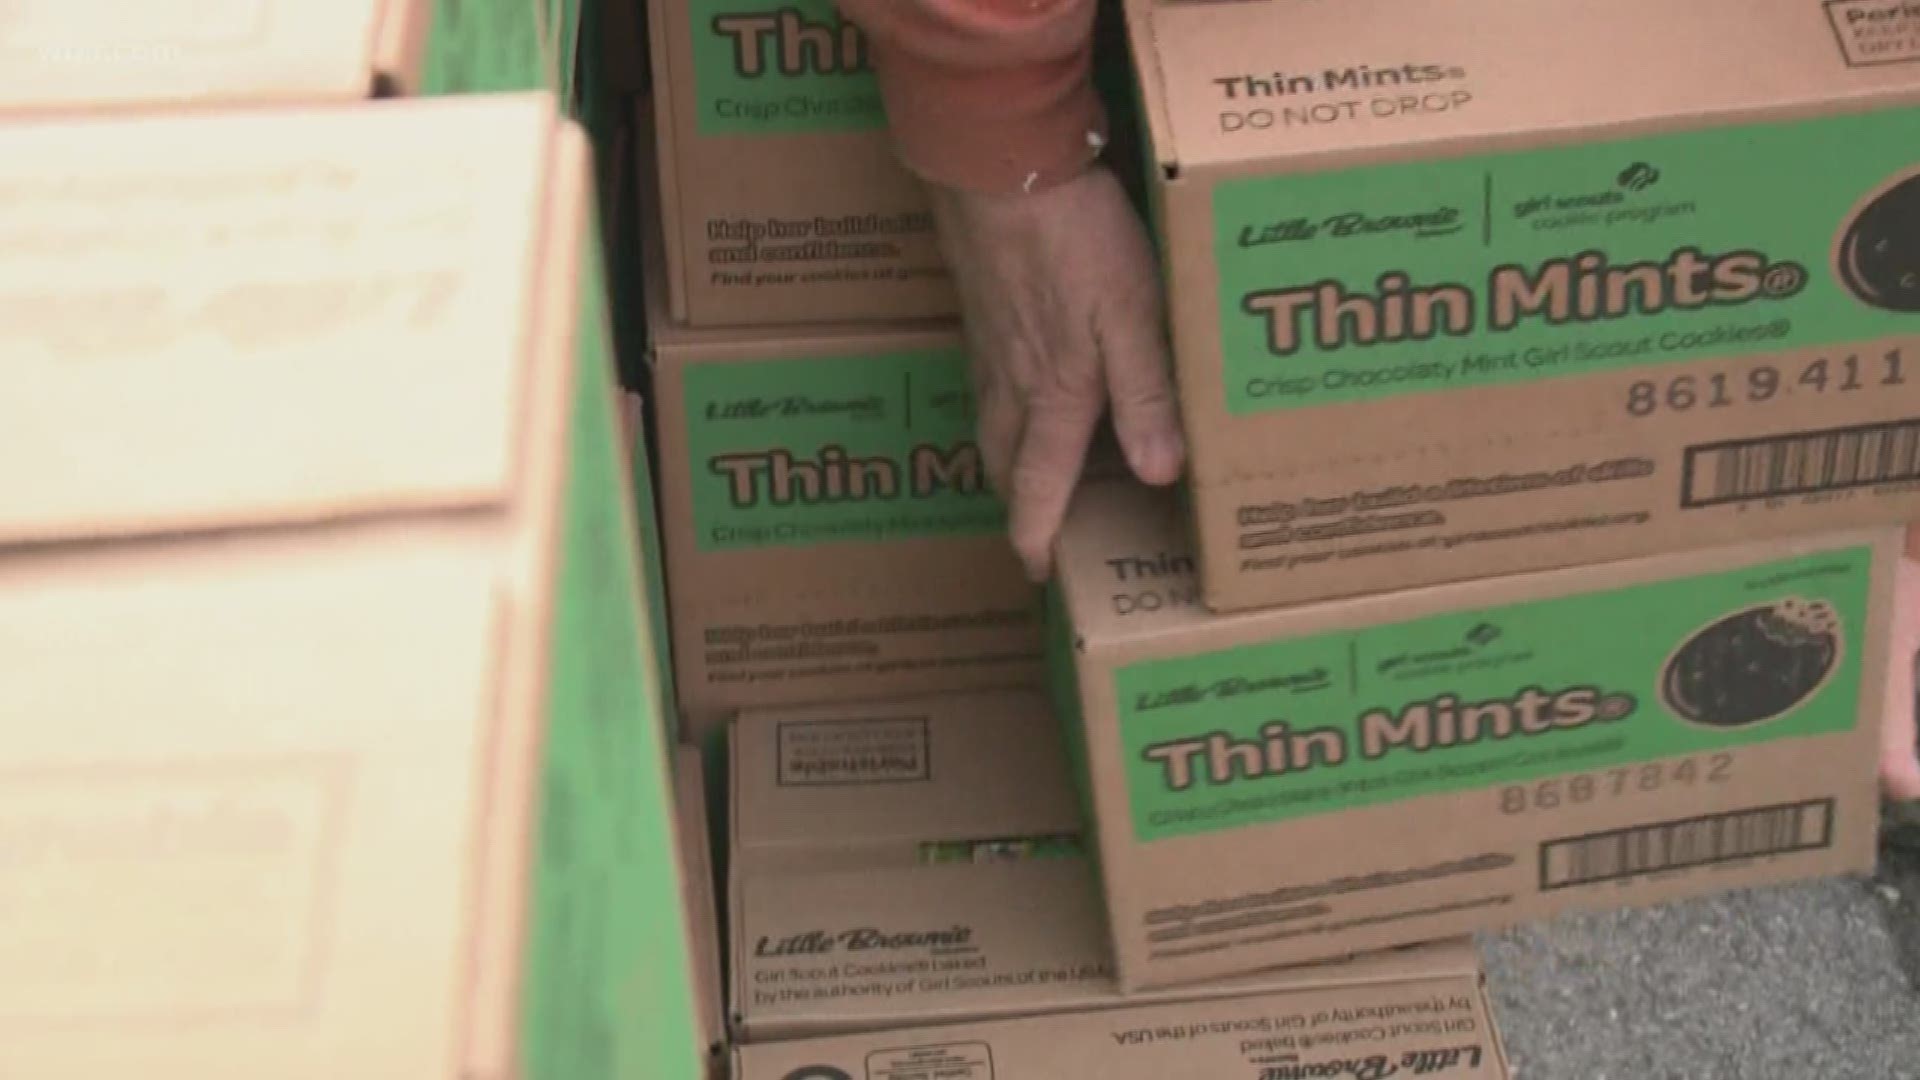 East Tennessee received a very sweet Valentine's gift today.A shipment of Girl Scout Cookie boxes arrived in Knoxville -- marking the start of Girl Scout Cookie season.